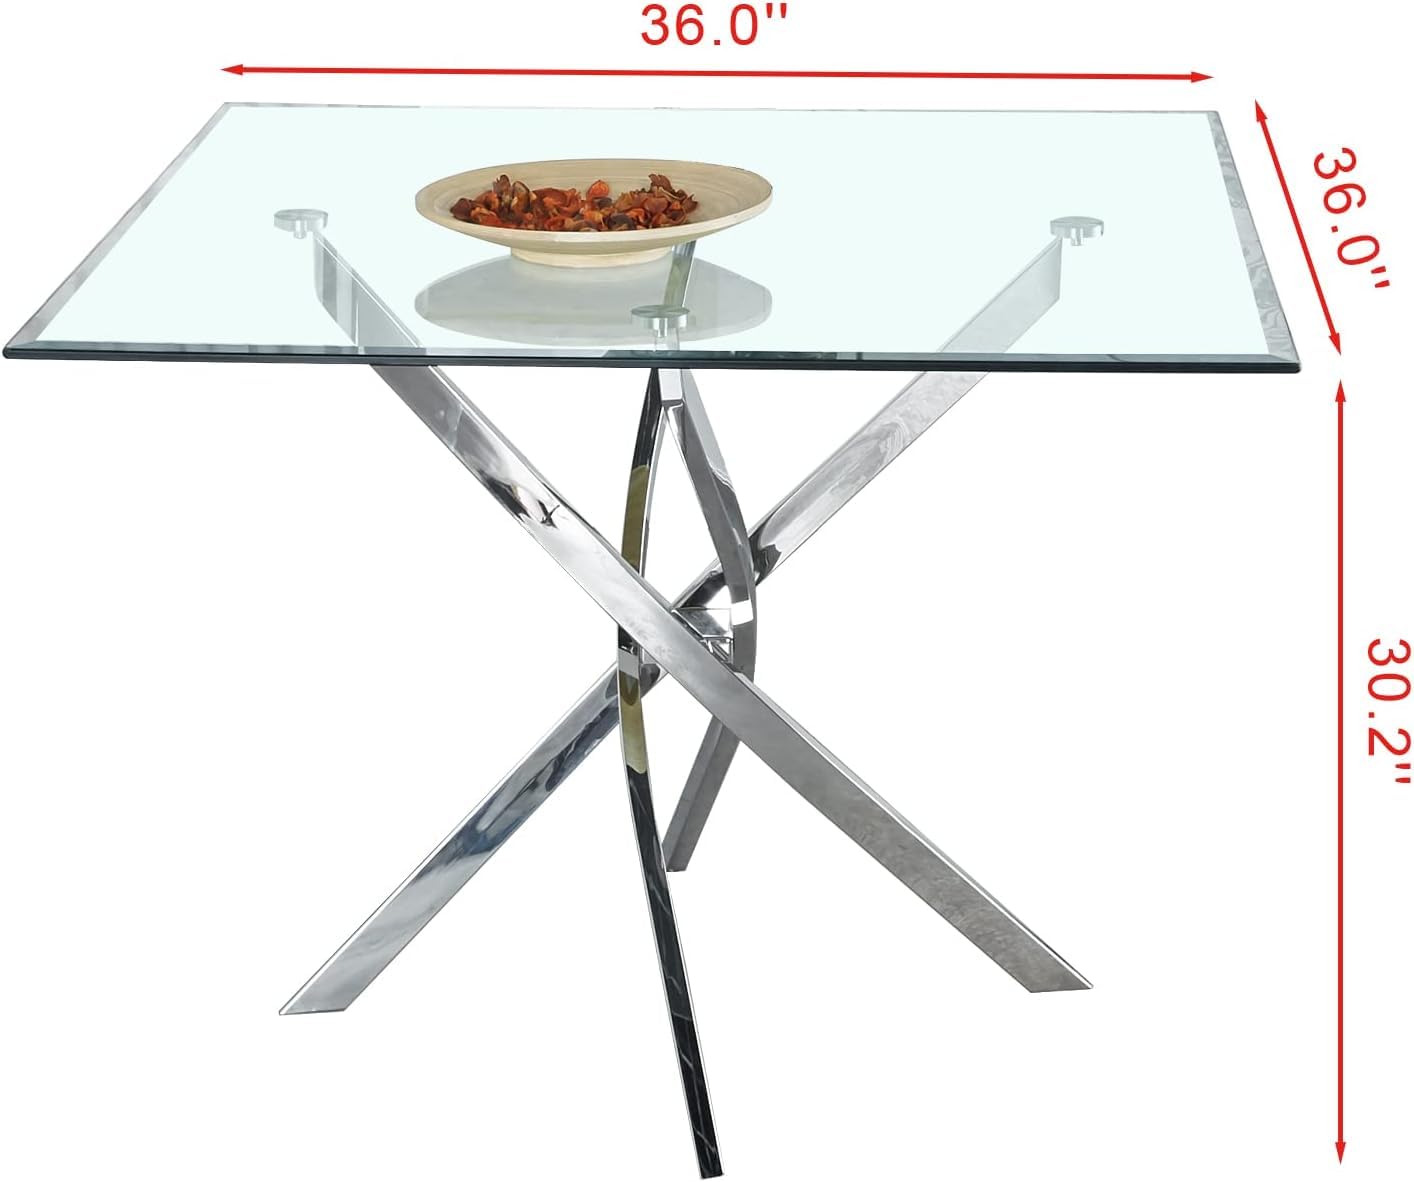 Round Dining Table,36" Glass Dining Room Table,Suitable for 2-4 People,Modern Circle Dining Room Table with Stainless Steel Legs & Glass Top,Small Kitchen Table for Living Room,Office